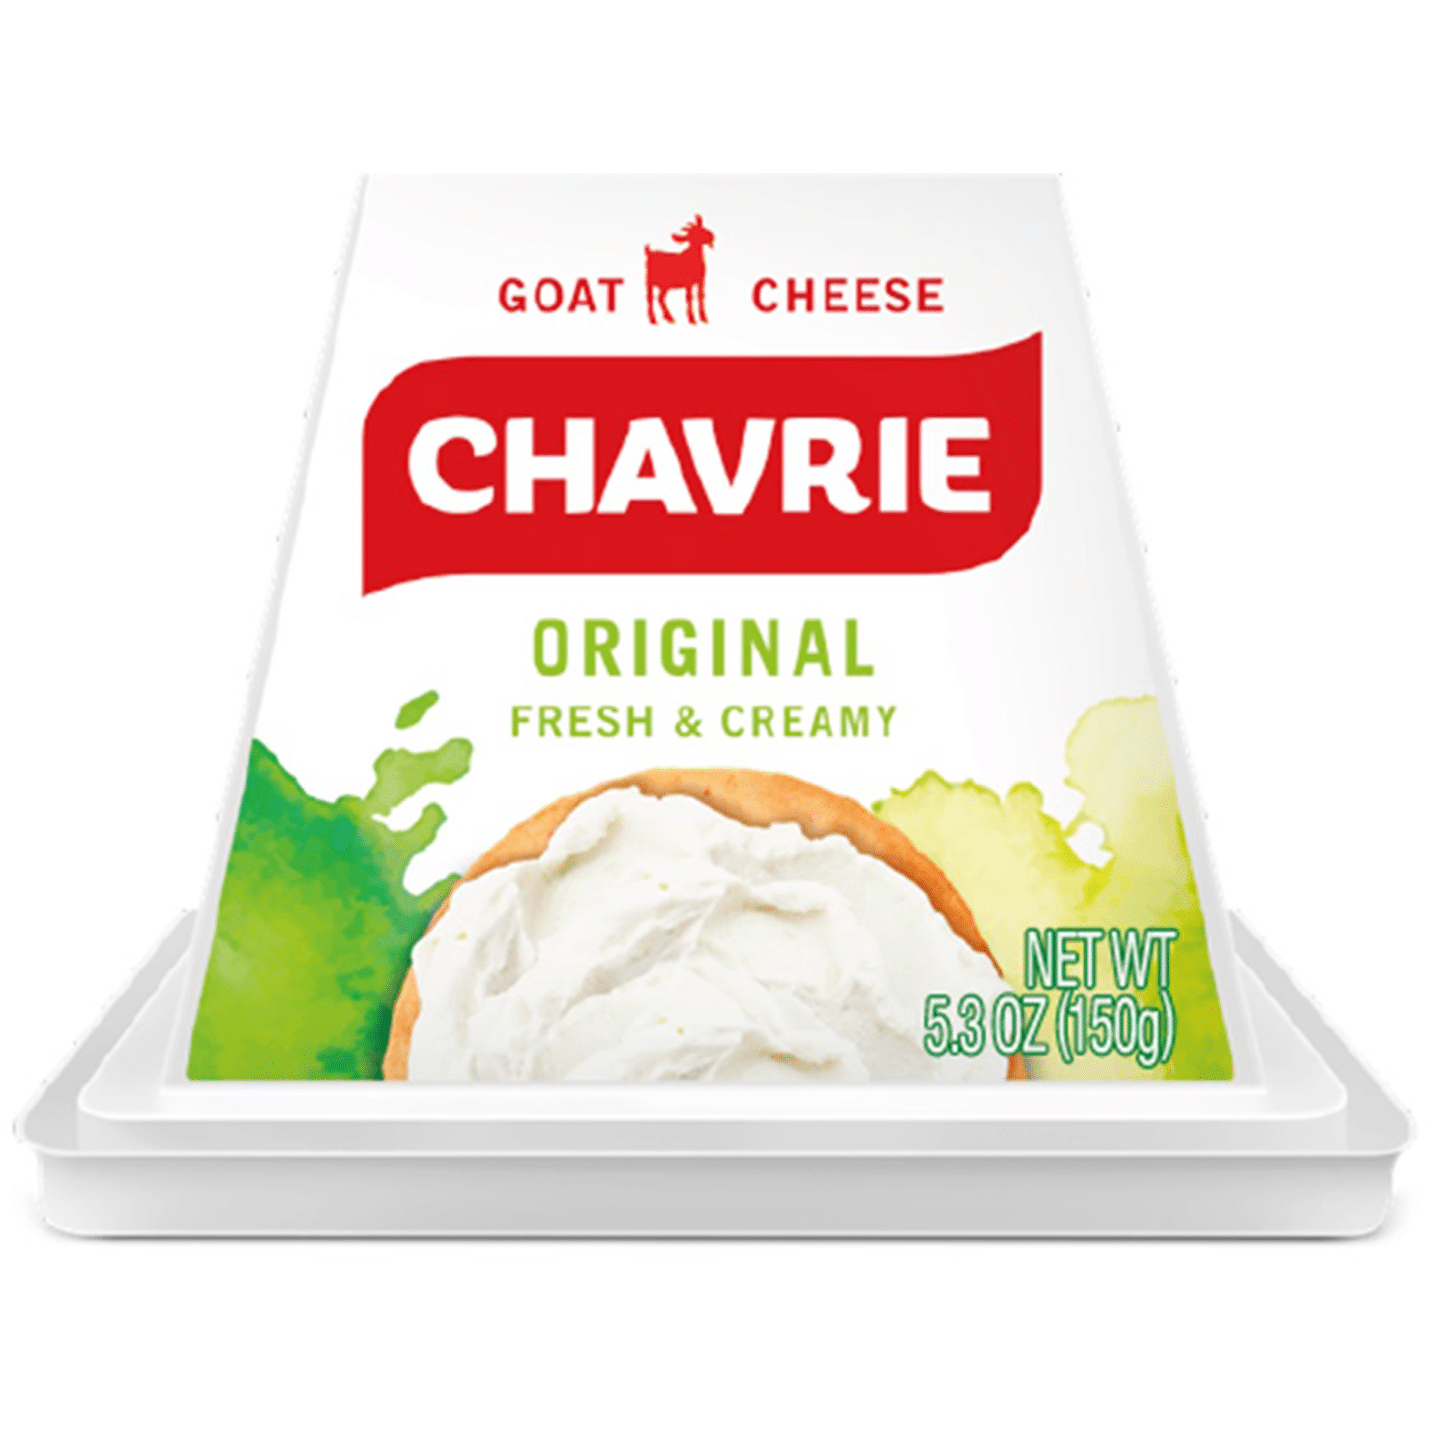 Chavrie goat cheese original pyramid packaging